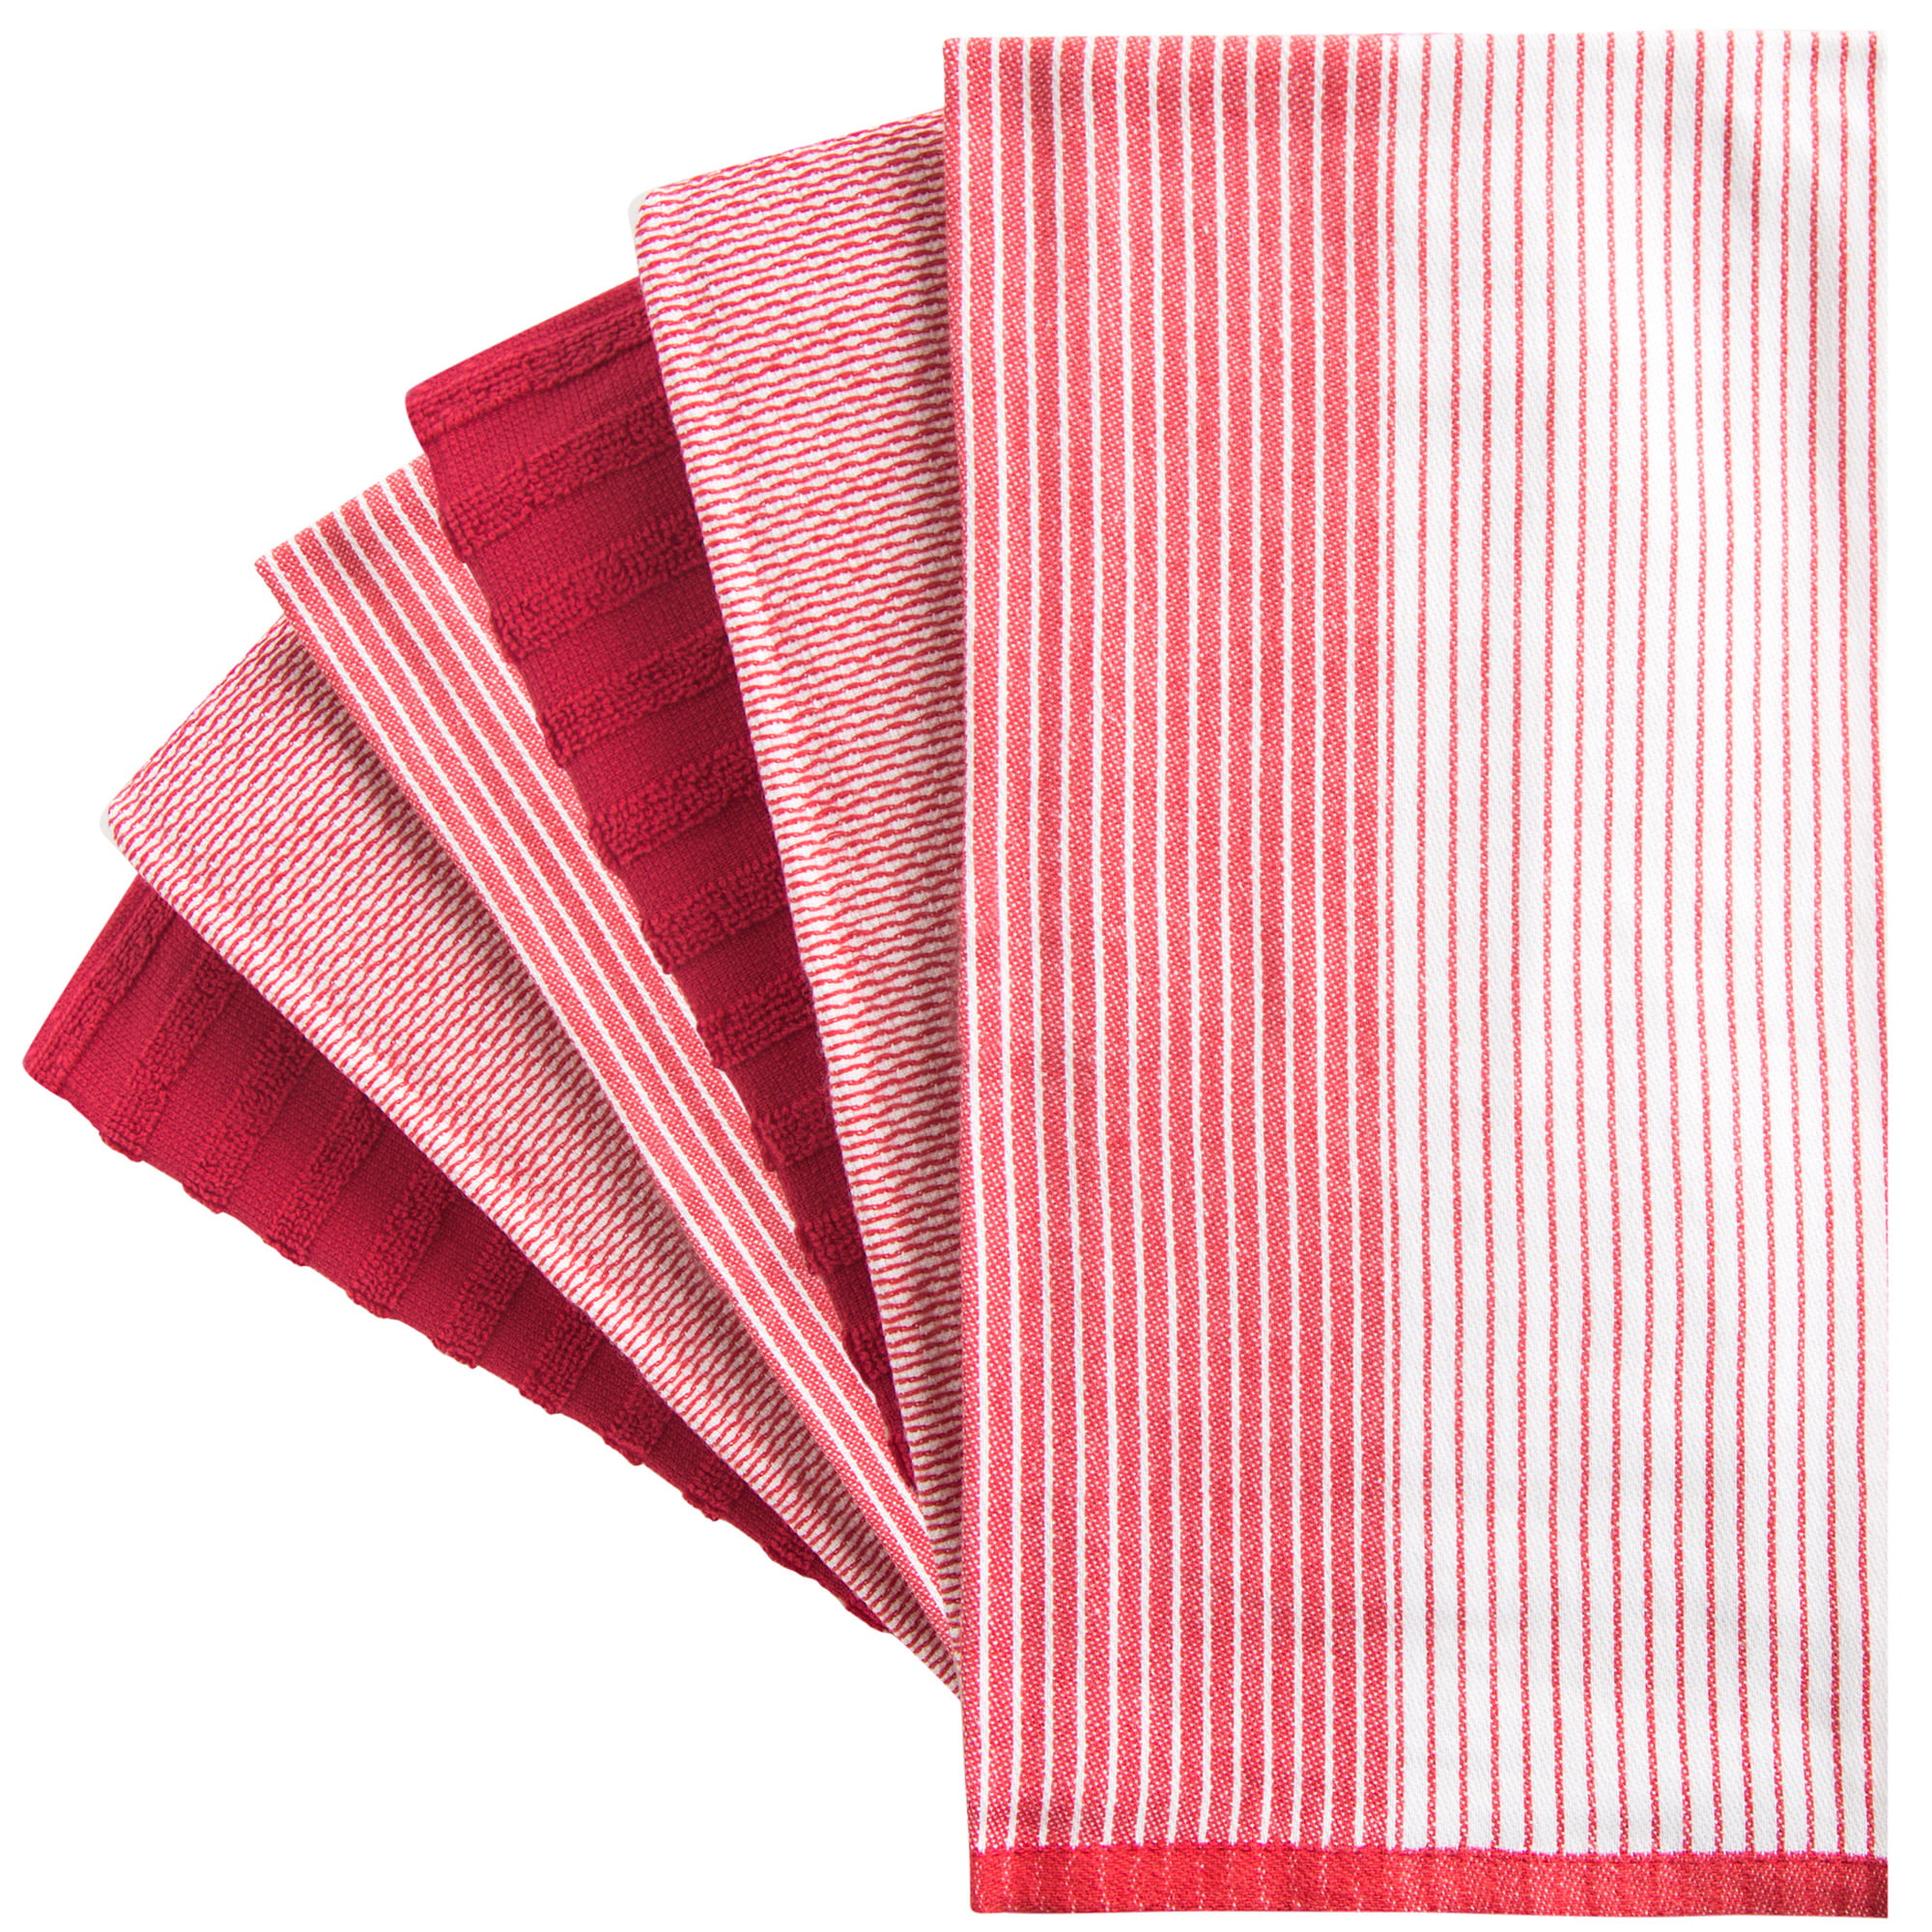 Lane Linen Kitchen Towels Set - Pack of 12 Cotton Dish Towels for Drying Dishes, 18Ax 28A, Kitchen Hand Towels, Absorbent Tea Towels, Premi